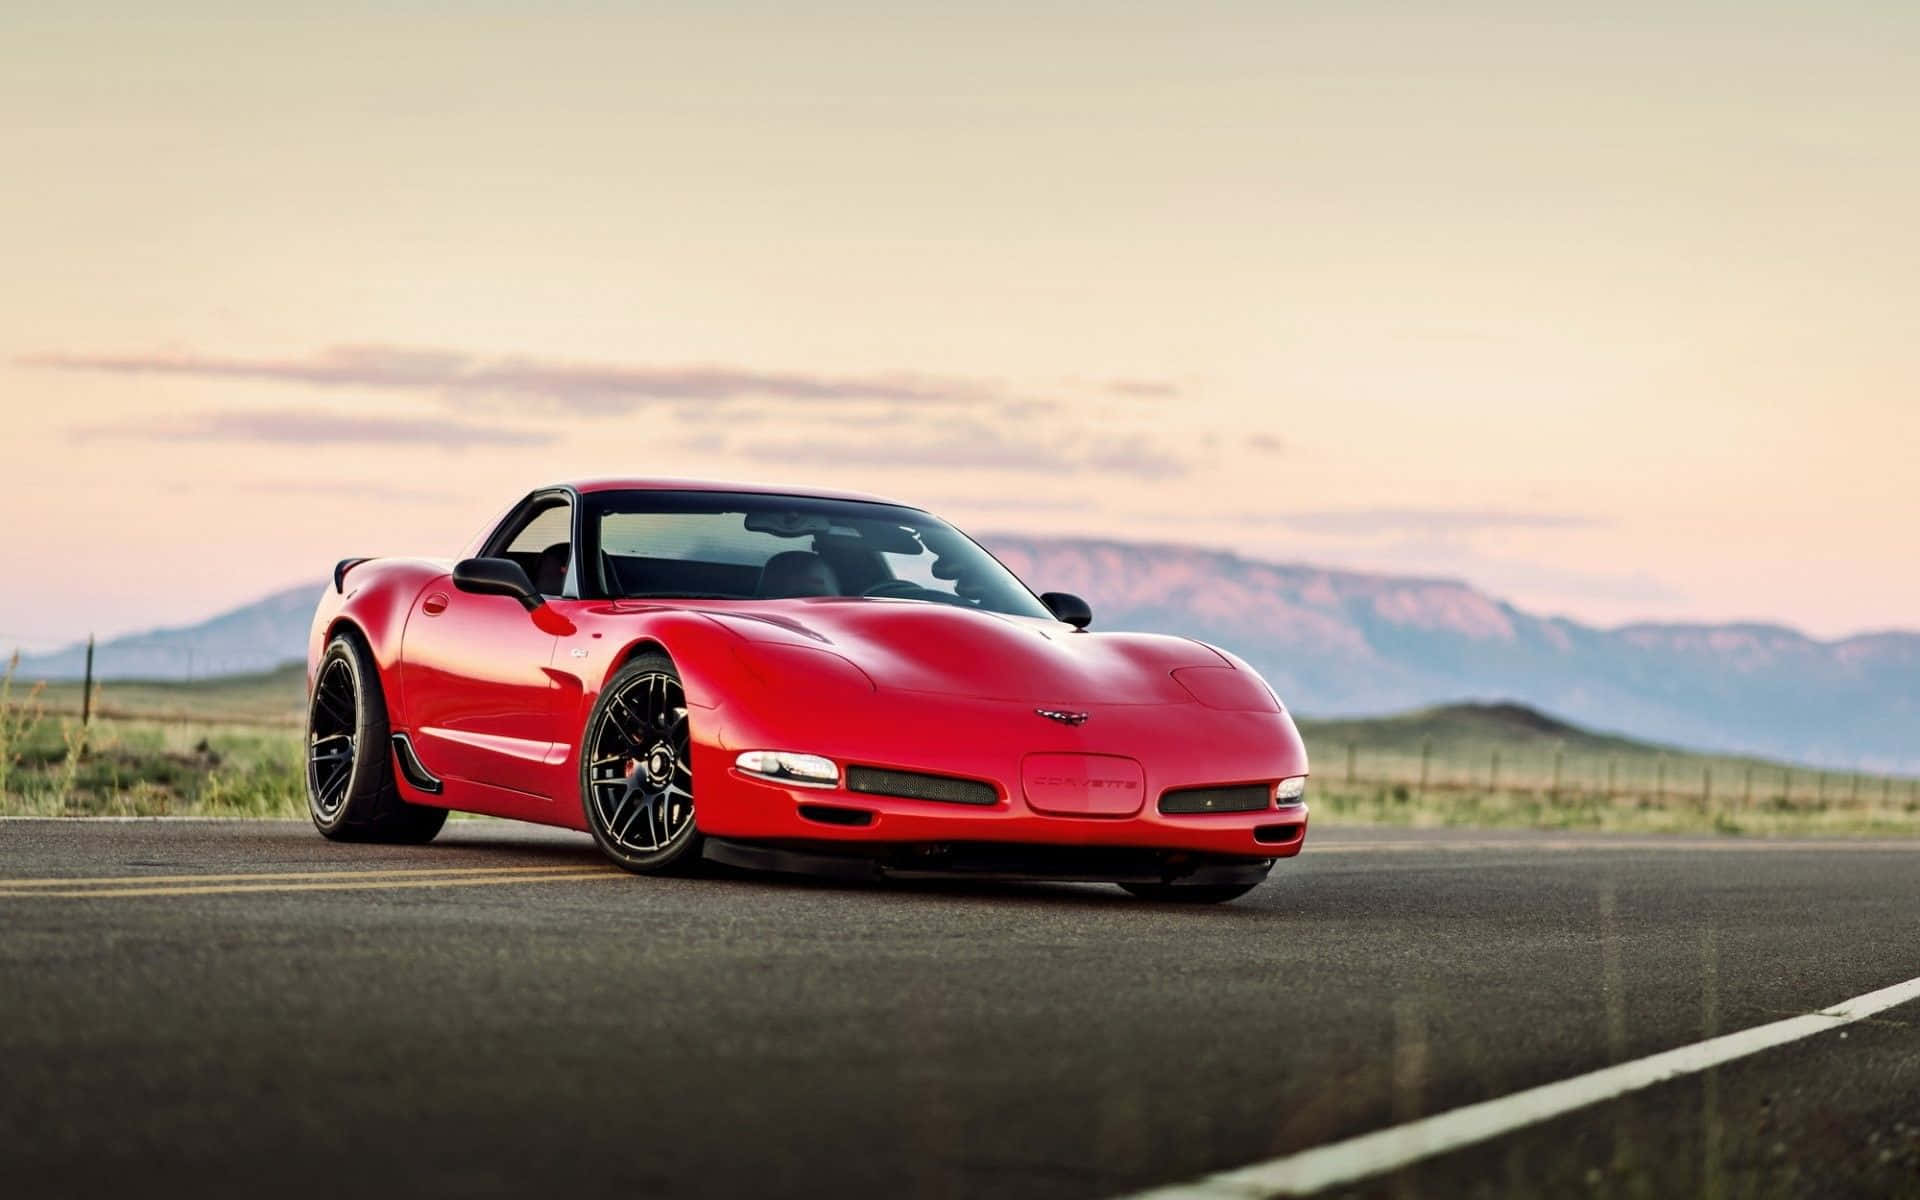 Unlock the power of speed with the classic Corvette.